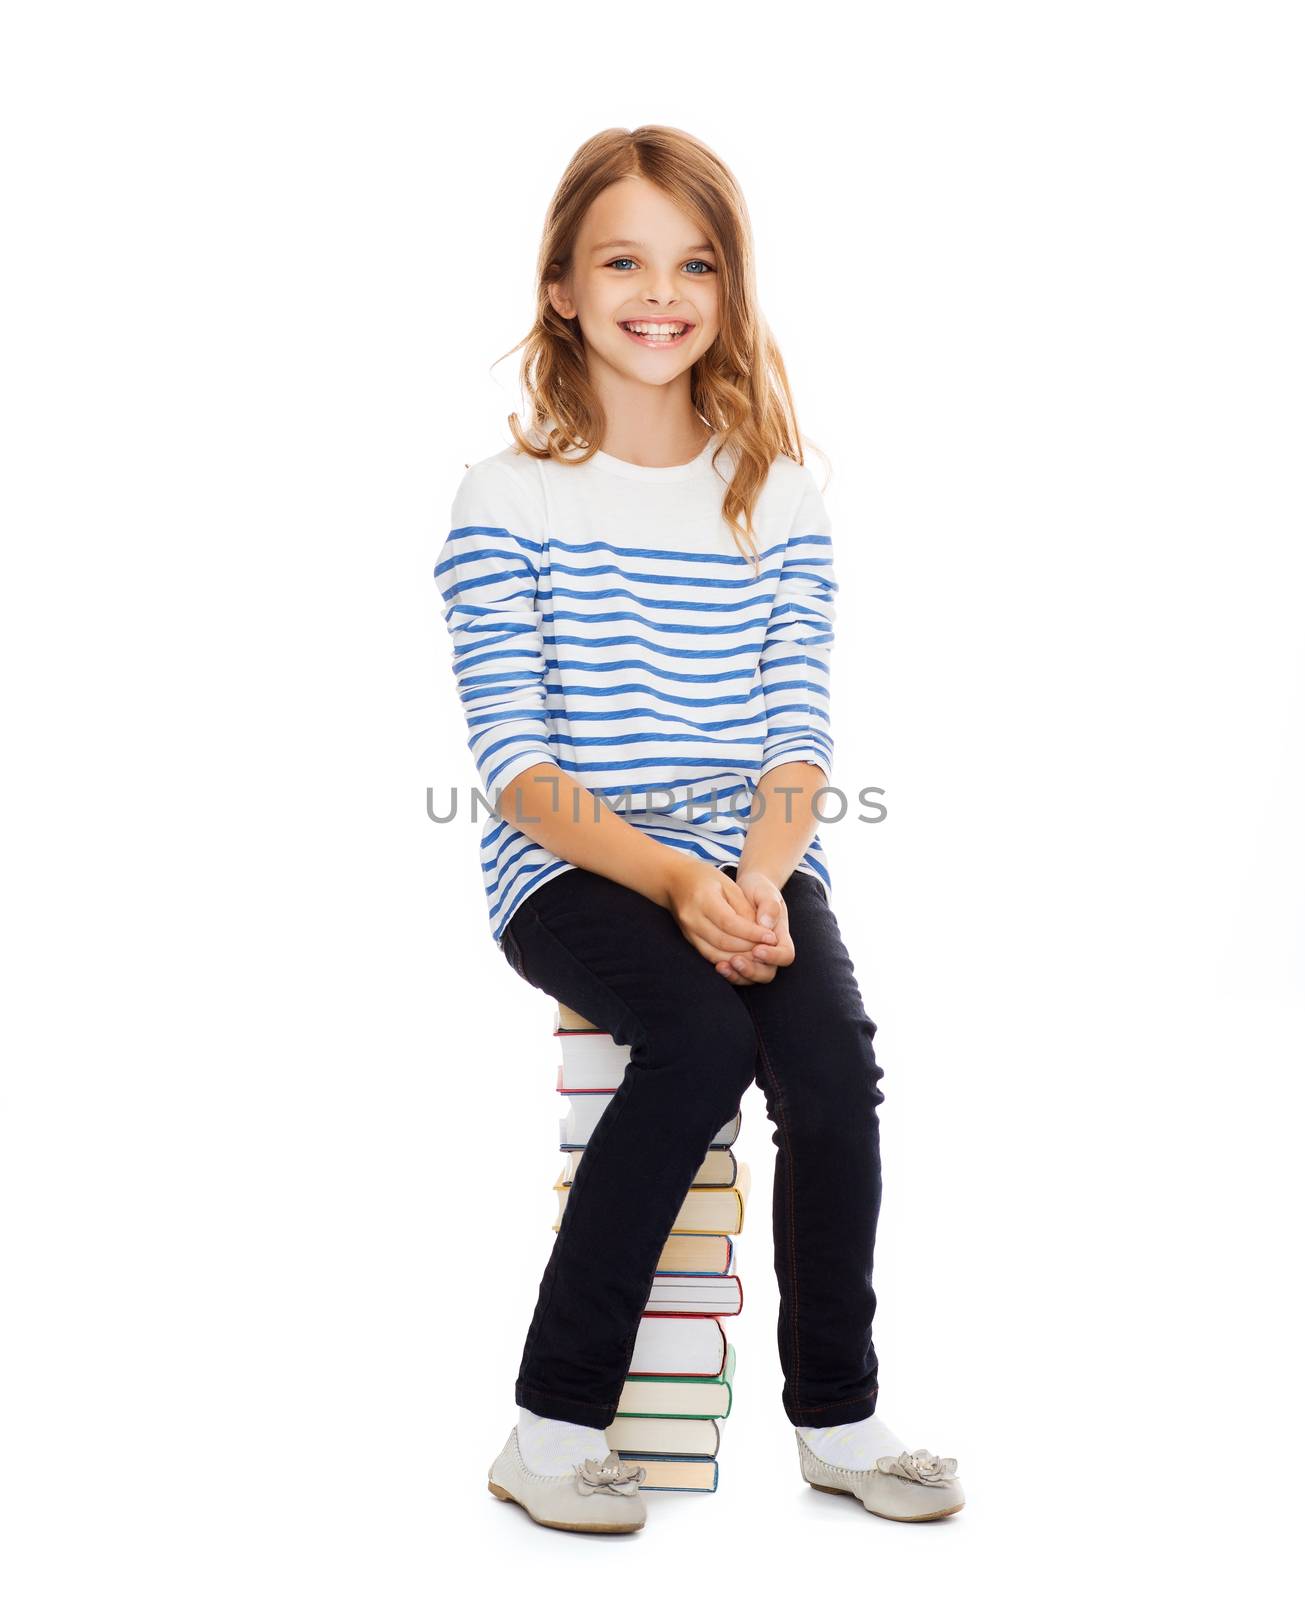 little student girl sitting on stack of books by dolgachov